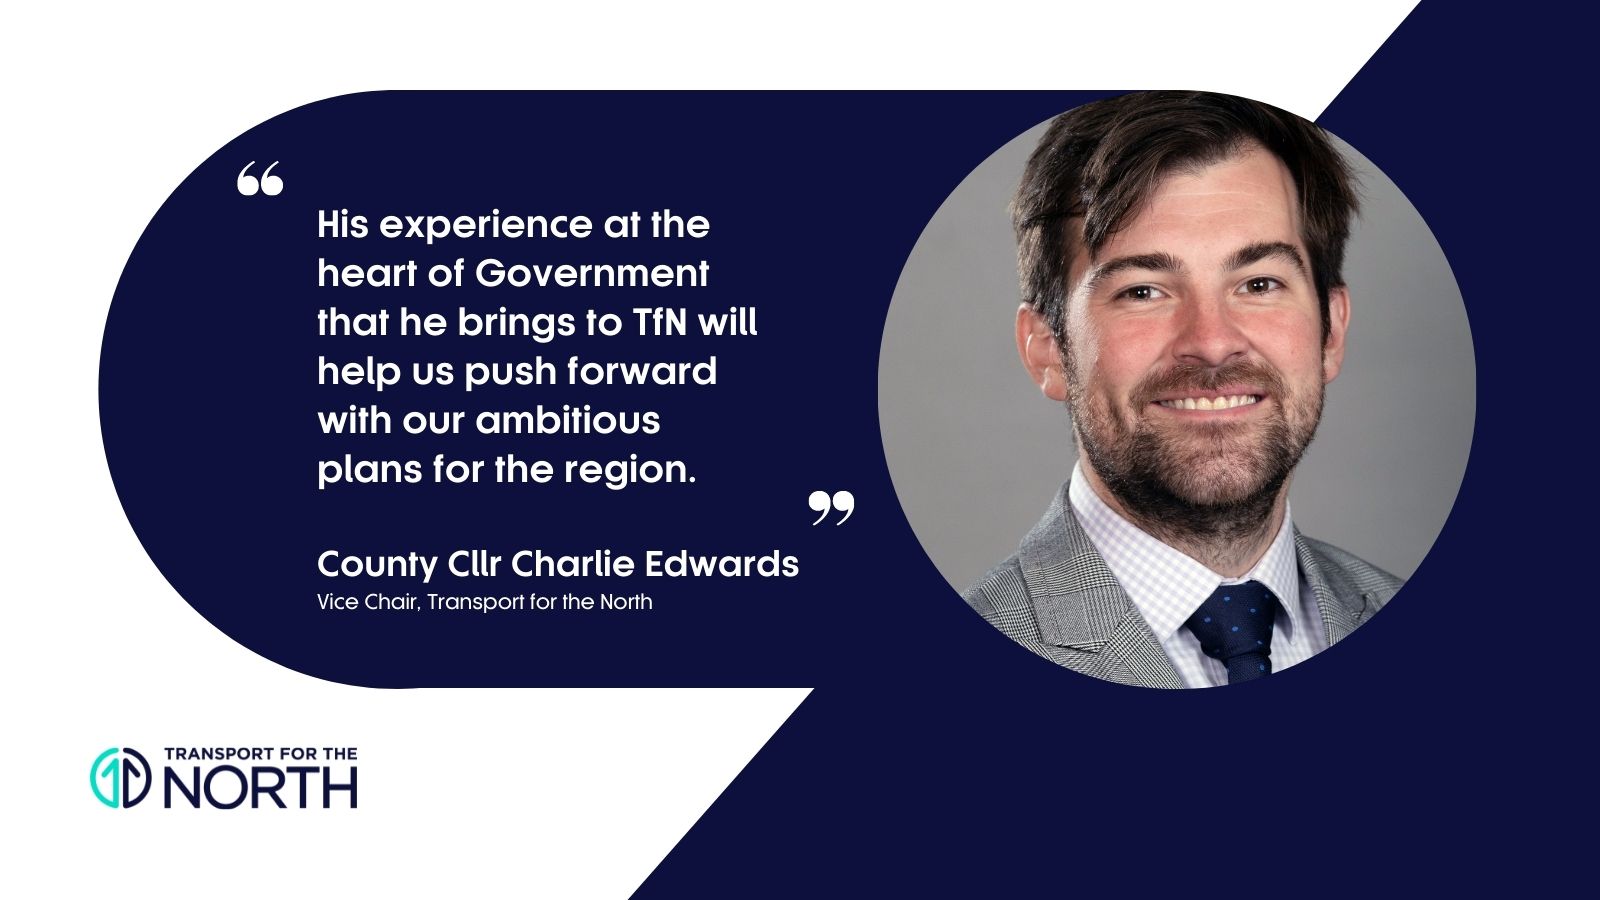 County Councillor Charlie Edwards, Vice Chair of Transport for the North comments on the appointment of Lord McLoughlin